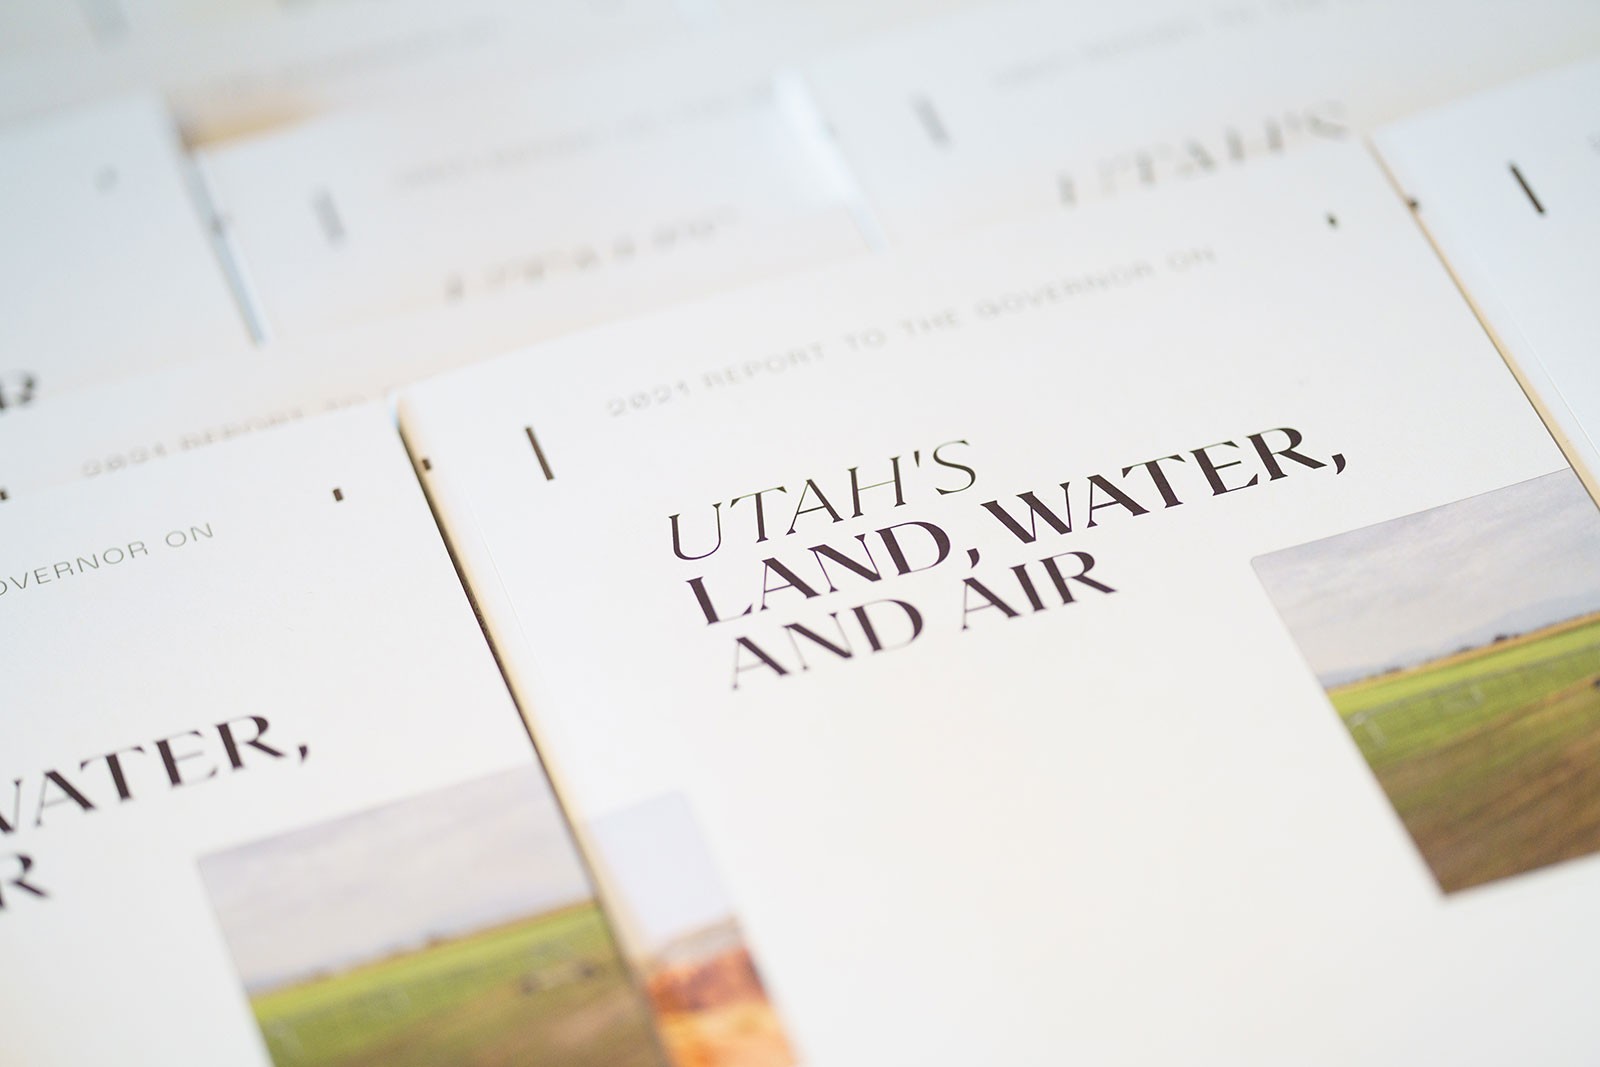 A booklet entitled "2021 Report to the Governor on Utah's Land, Water, and Air."